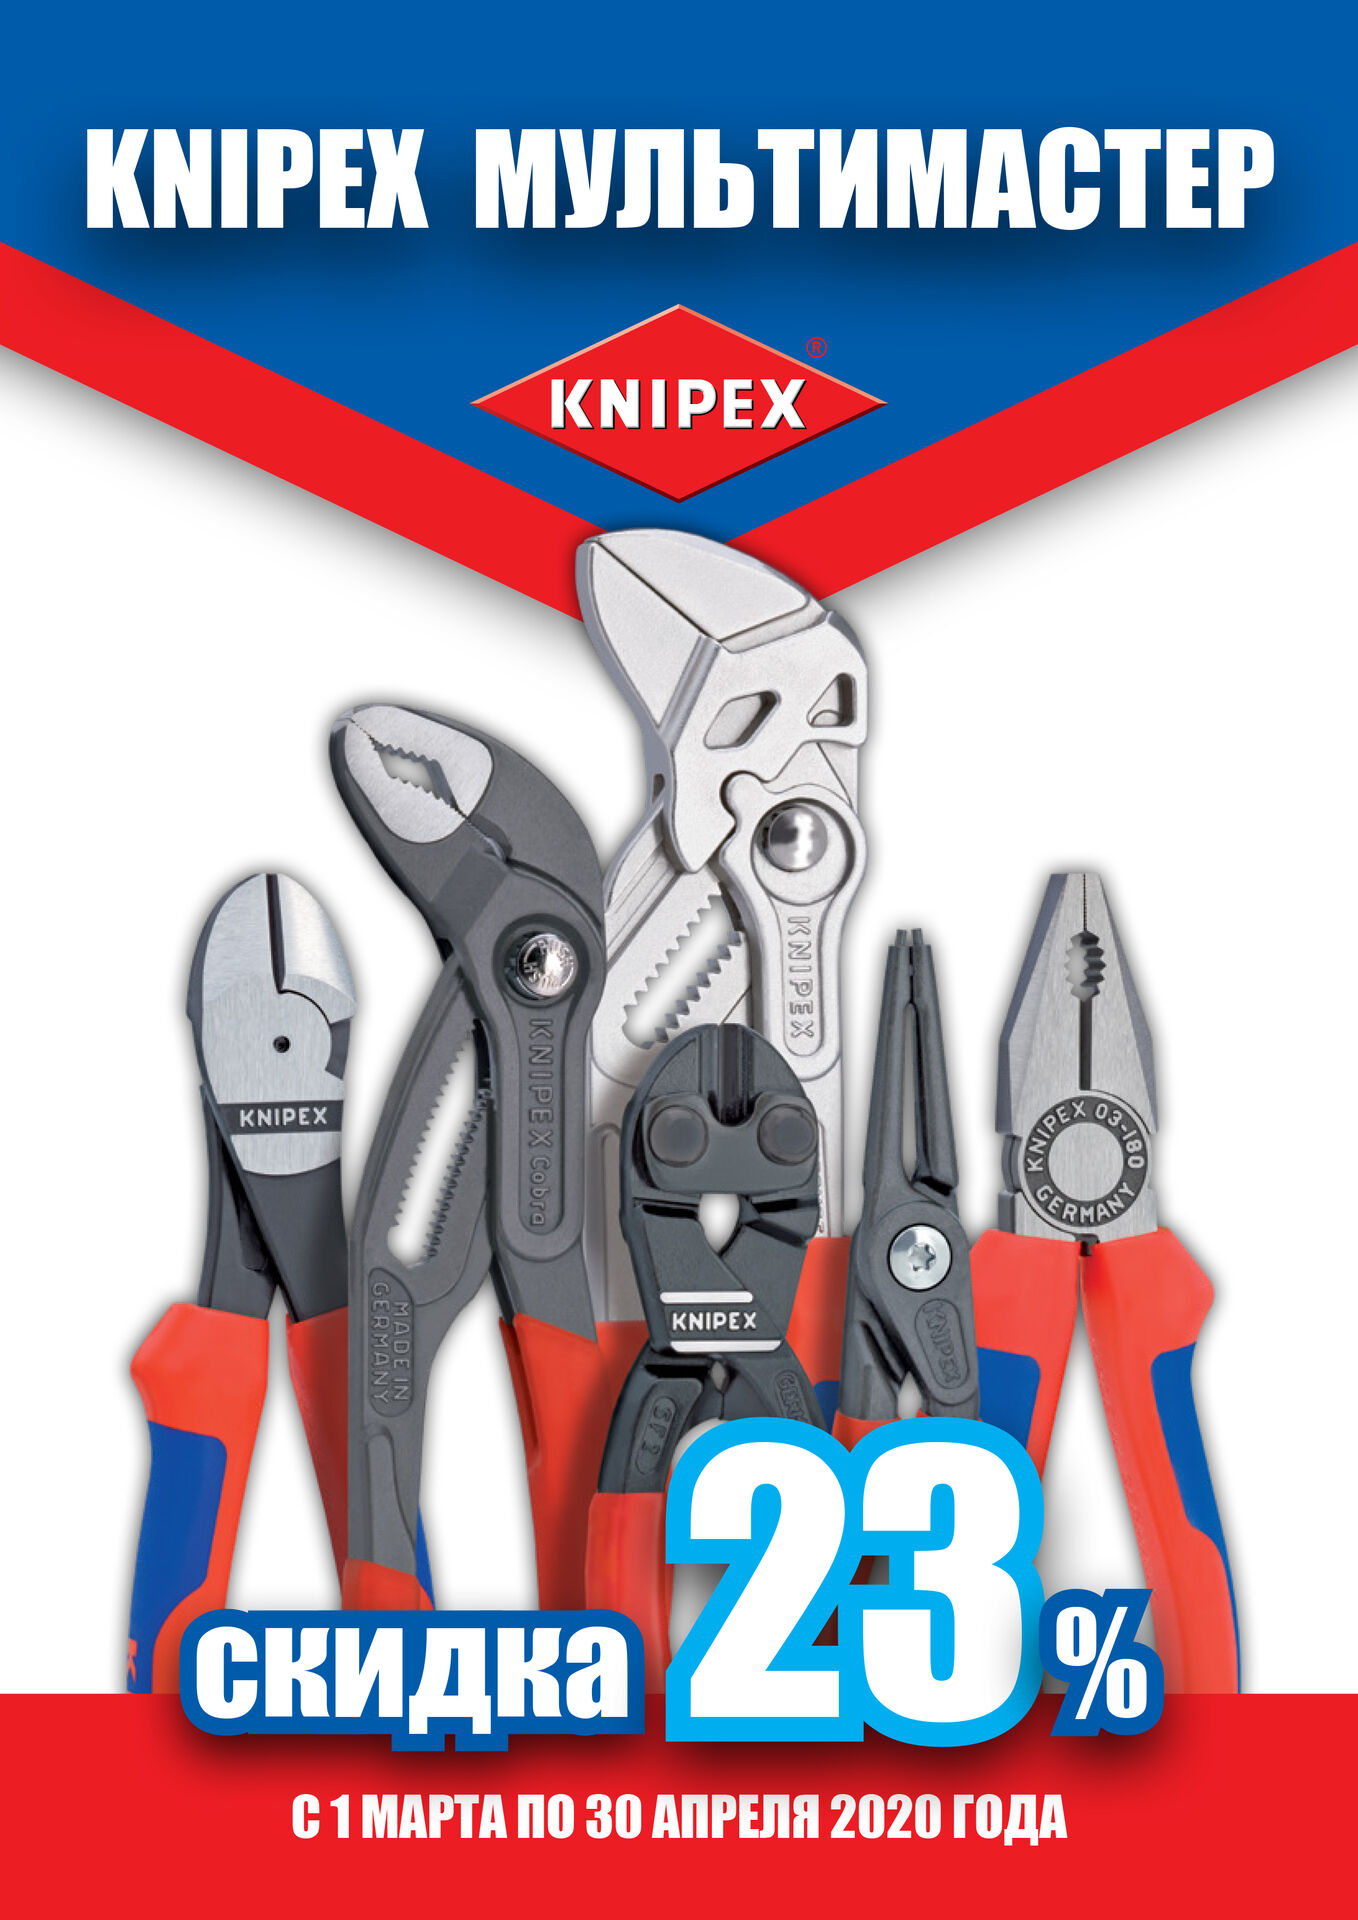 knipex-action-mart-2020